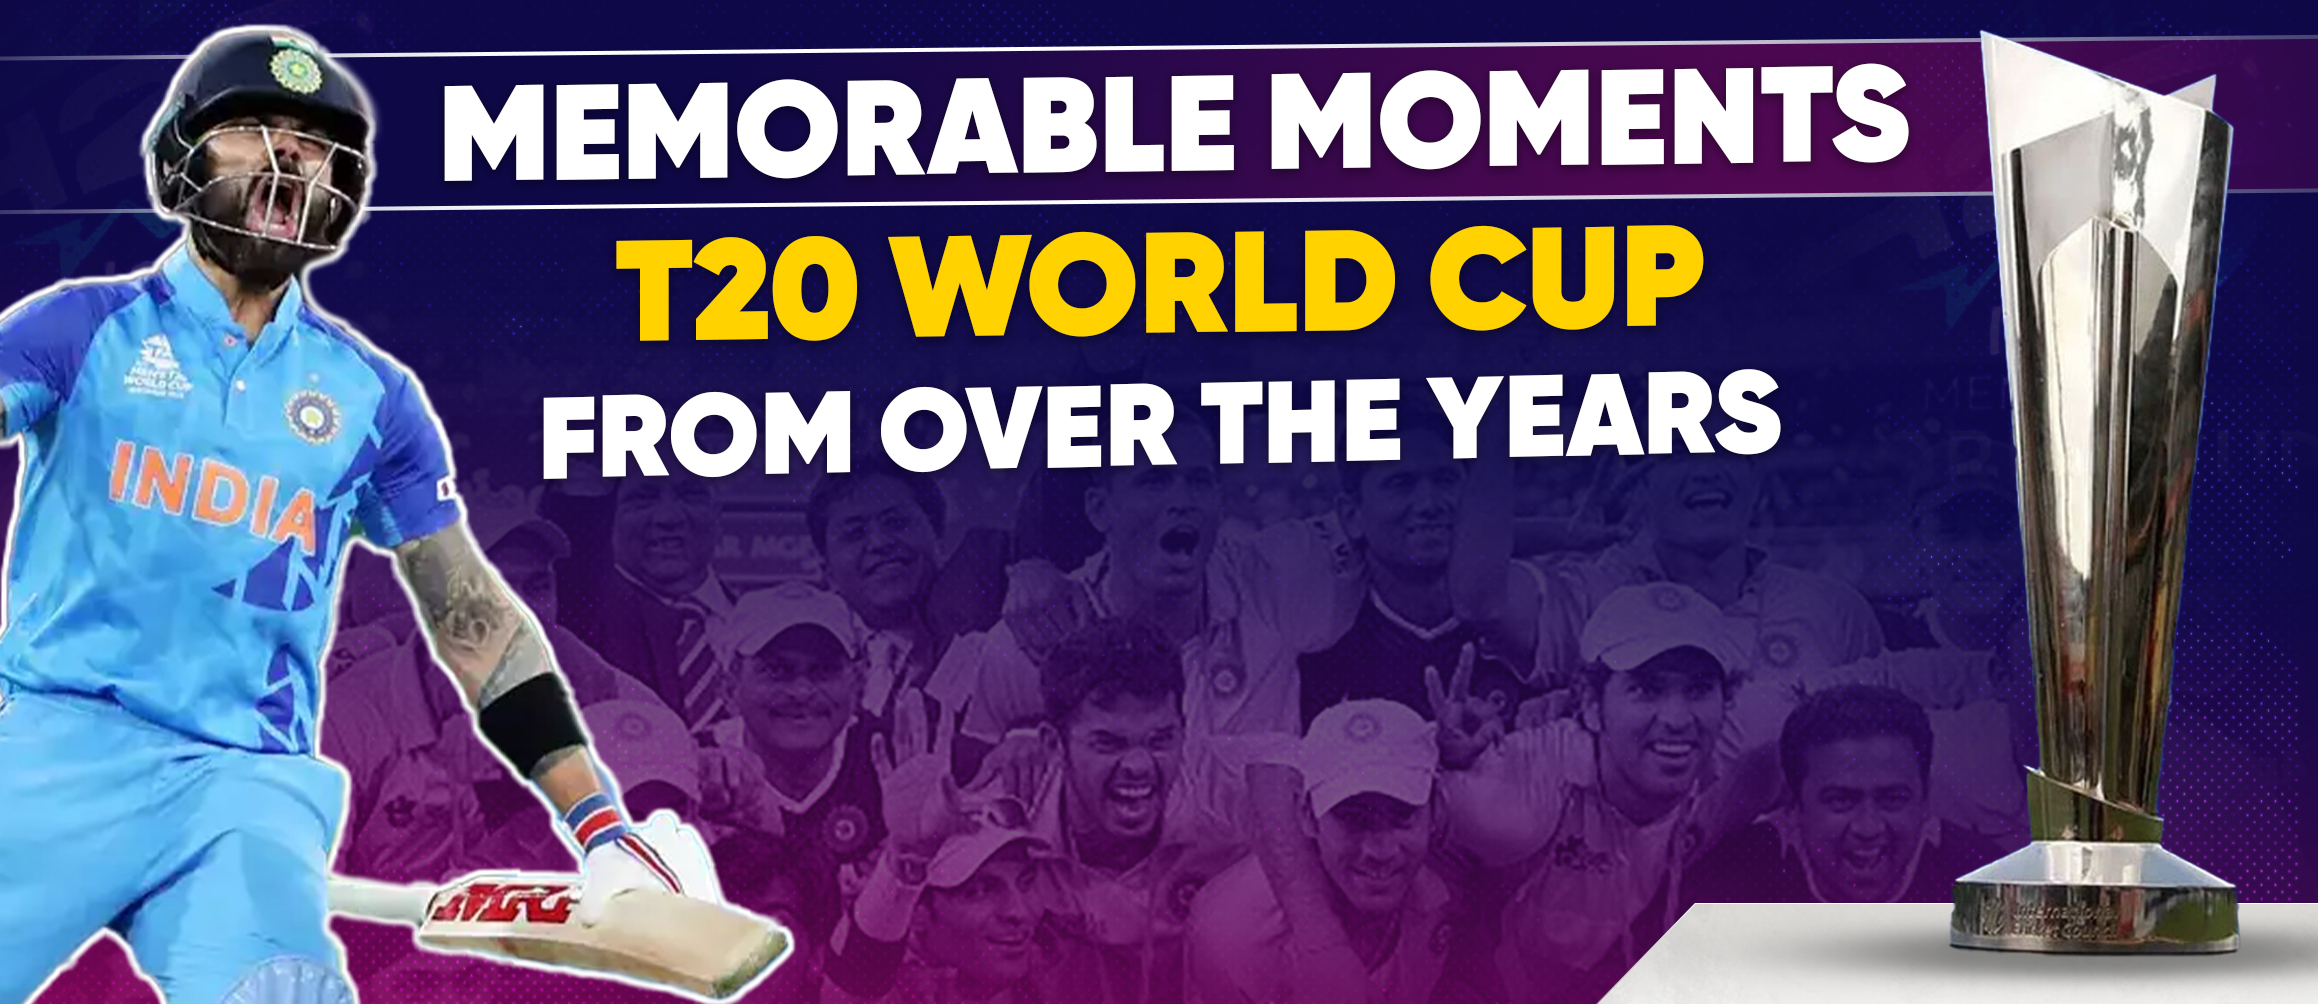 Memorable Moments of T20 World Cup from Over the Years